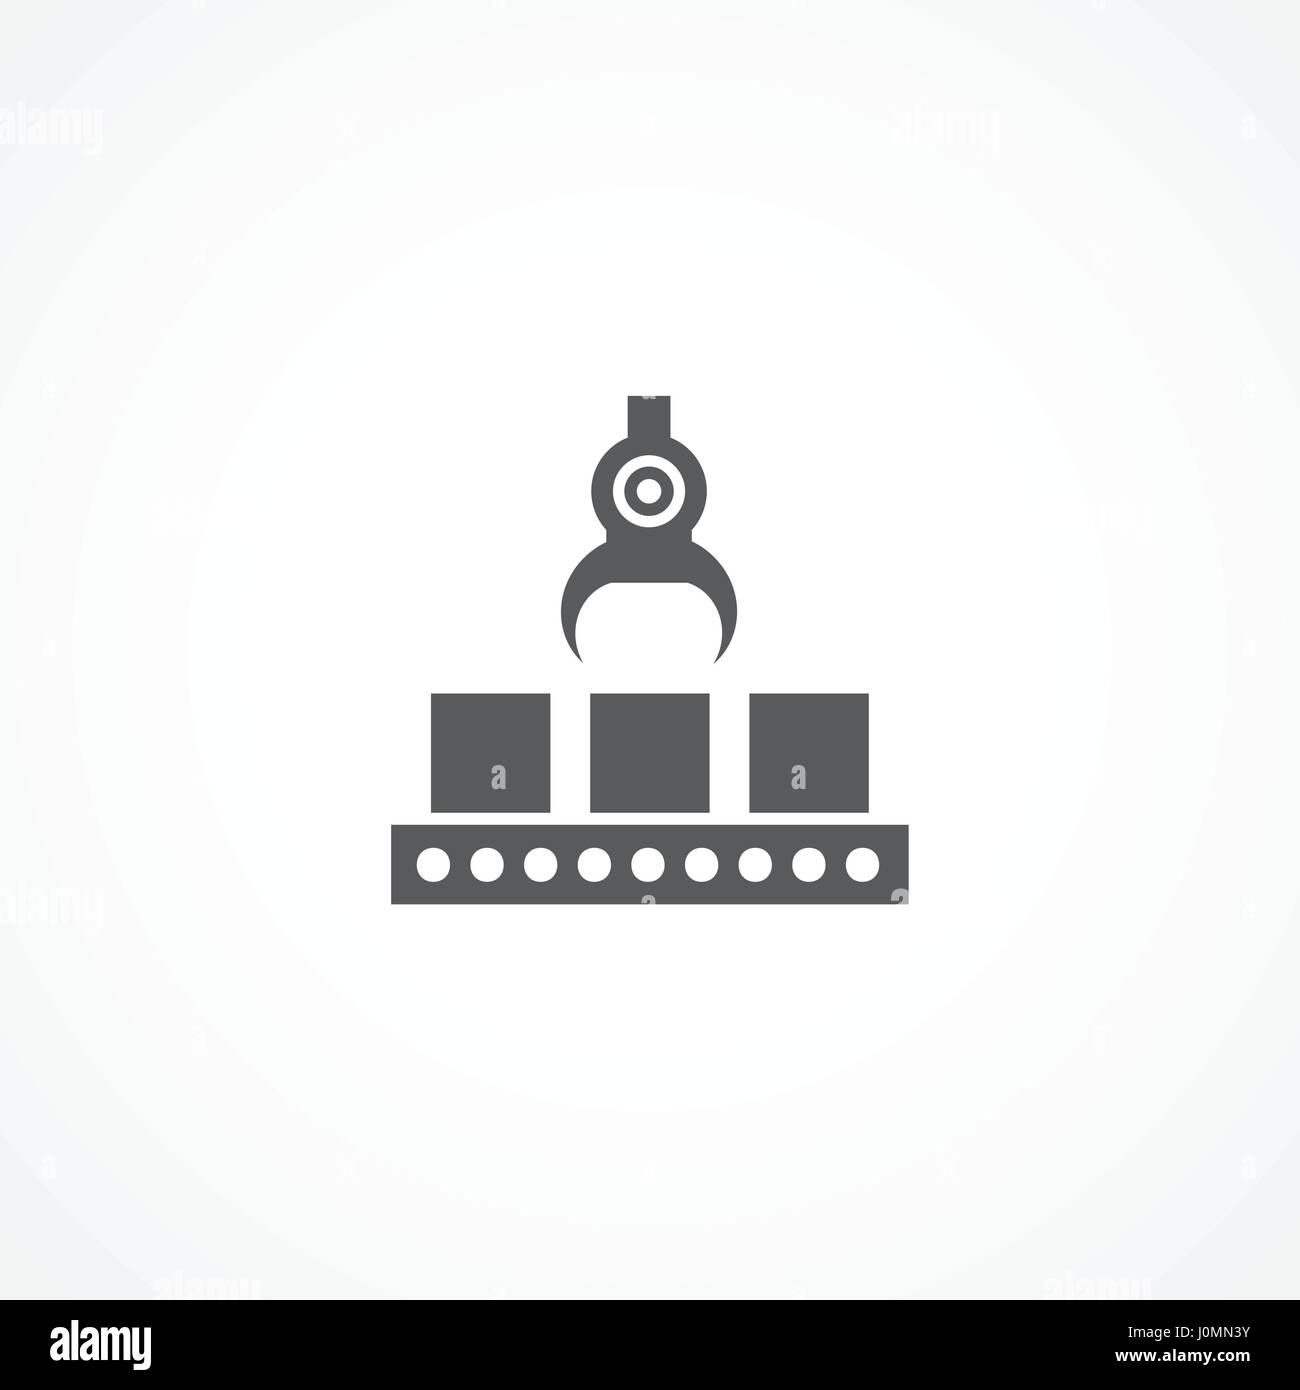 Production line icon Stock Vector